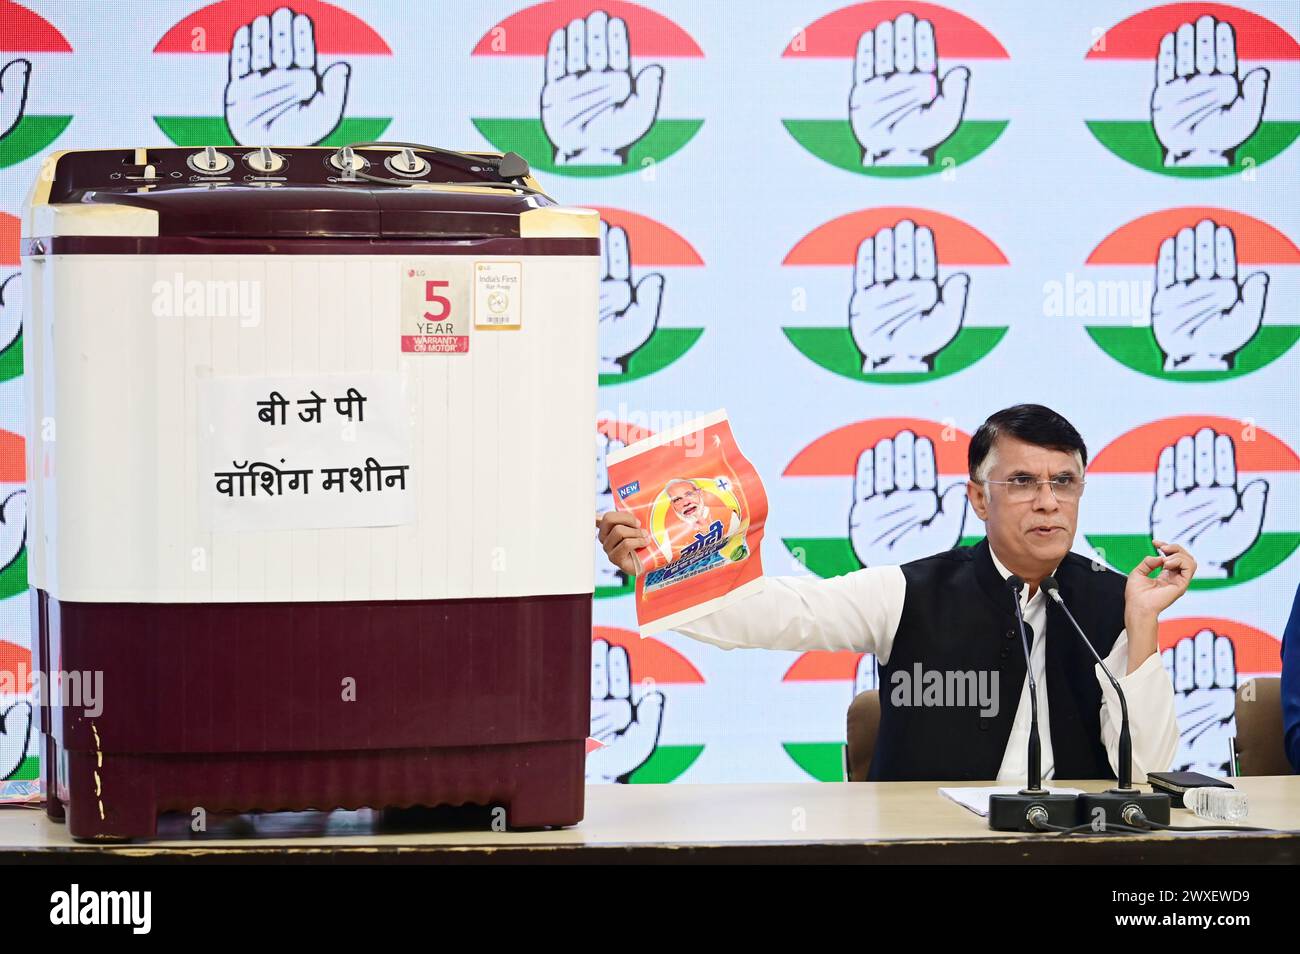 NEW DELHI, INDIA - MARCH 30: Congress leader Pawan Khera showing ‘Modi Washing Powder' and ‘Washing Machine' who cleans all corrupt Politicians and wash all charges levels against them if they Join BJP, during a press briefing at AICC, on March 30, 2024 in New Delhi, India. The Congress raised the issue of leaders, against whom there have been corruption charges, joining or aligning with the BJP only to see “the cases against them being closed”, an allegation often leveled by opposition parties. (Photo by Vipin Kumar/Hindustan Times/Sipa USA ) Stock Photo